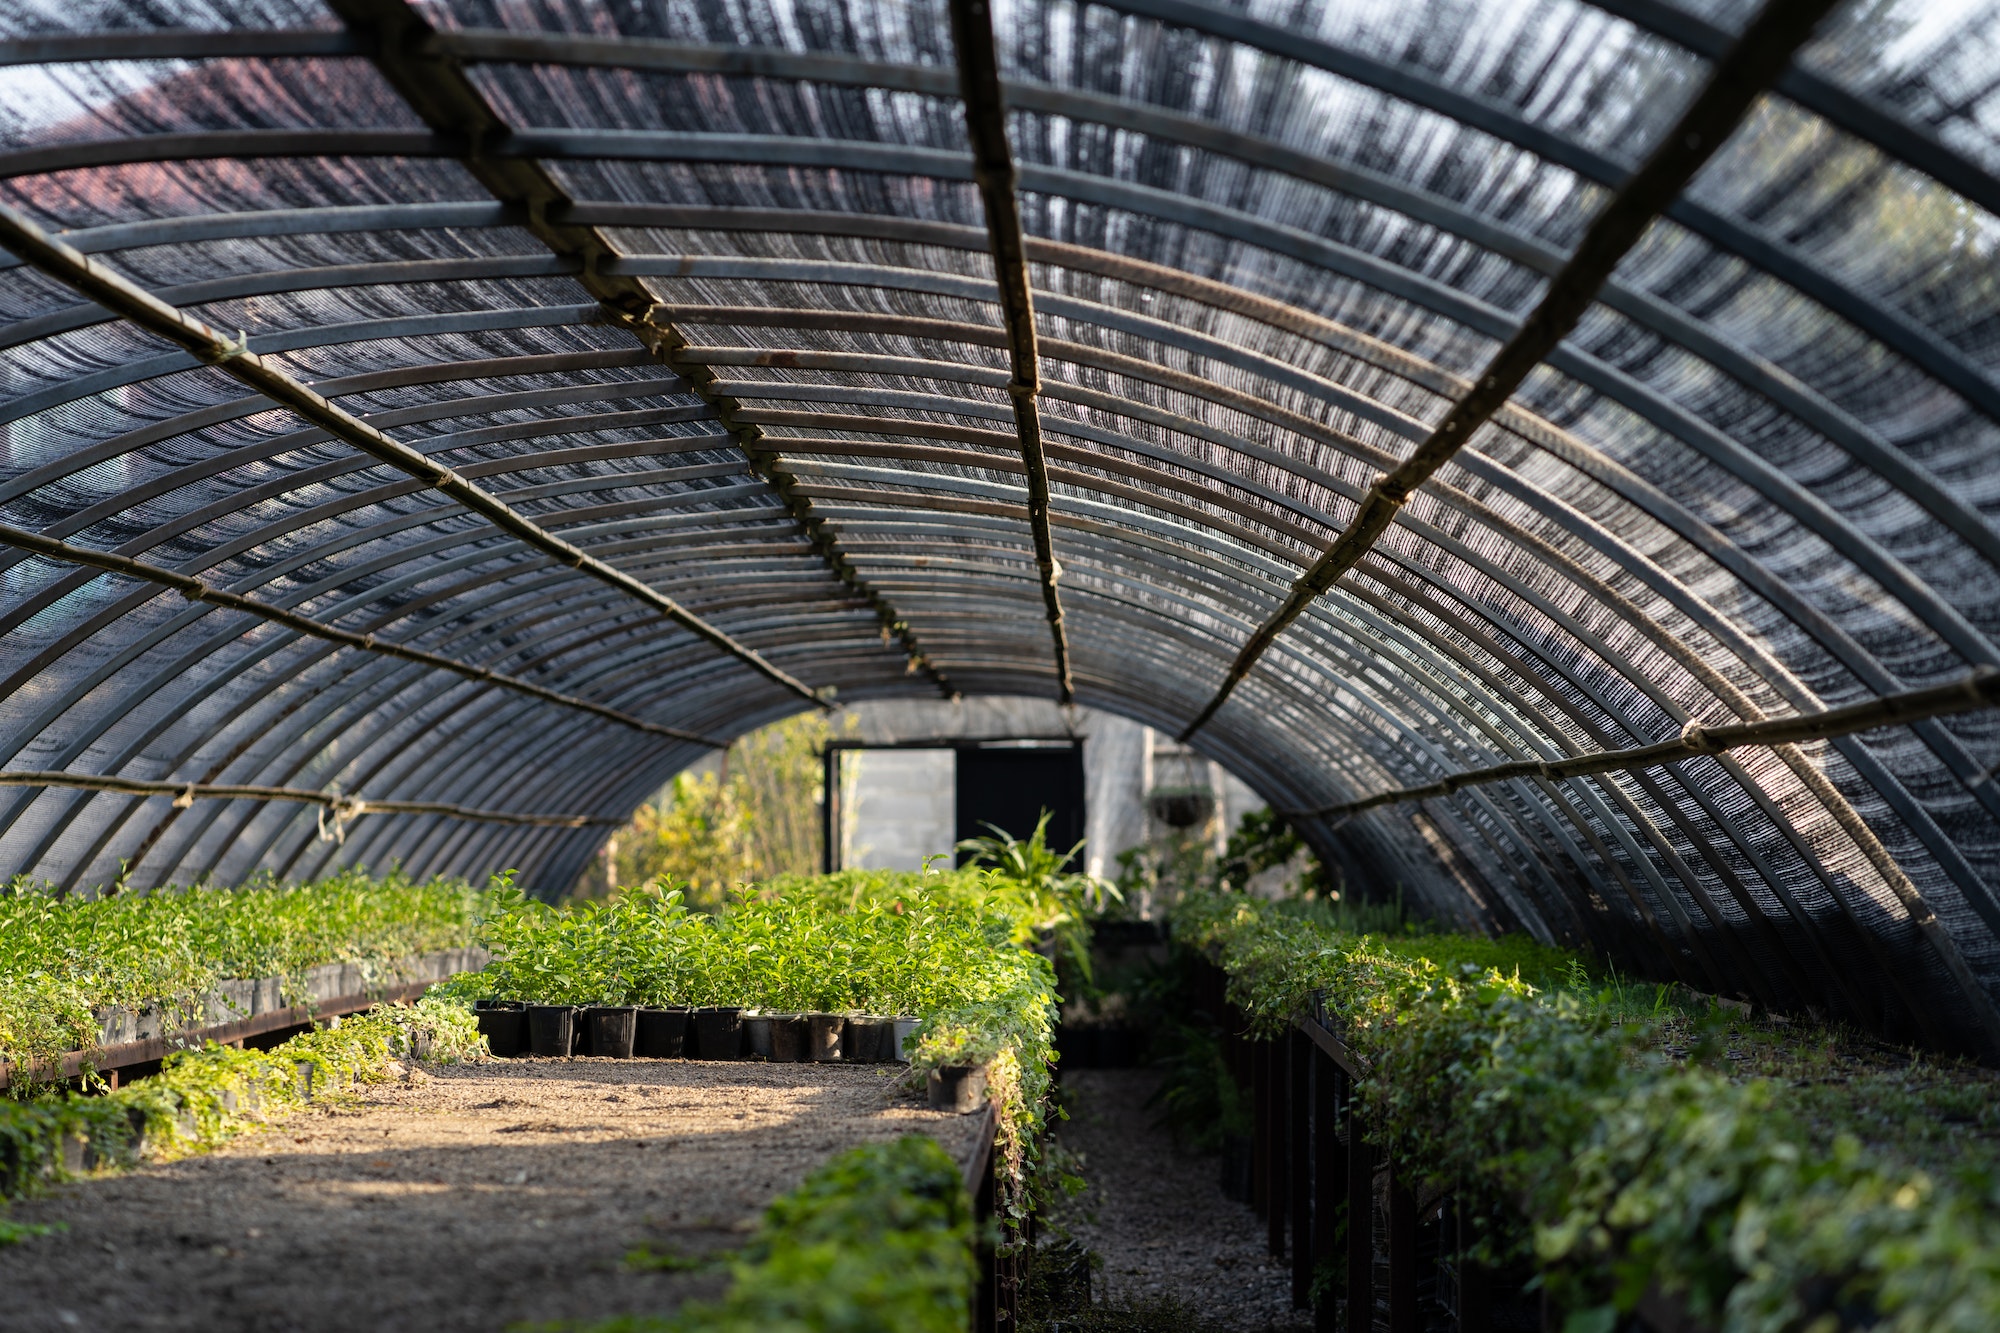 Greenhouse room with tropical plants located along long corridors structure with glass roof